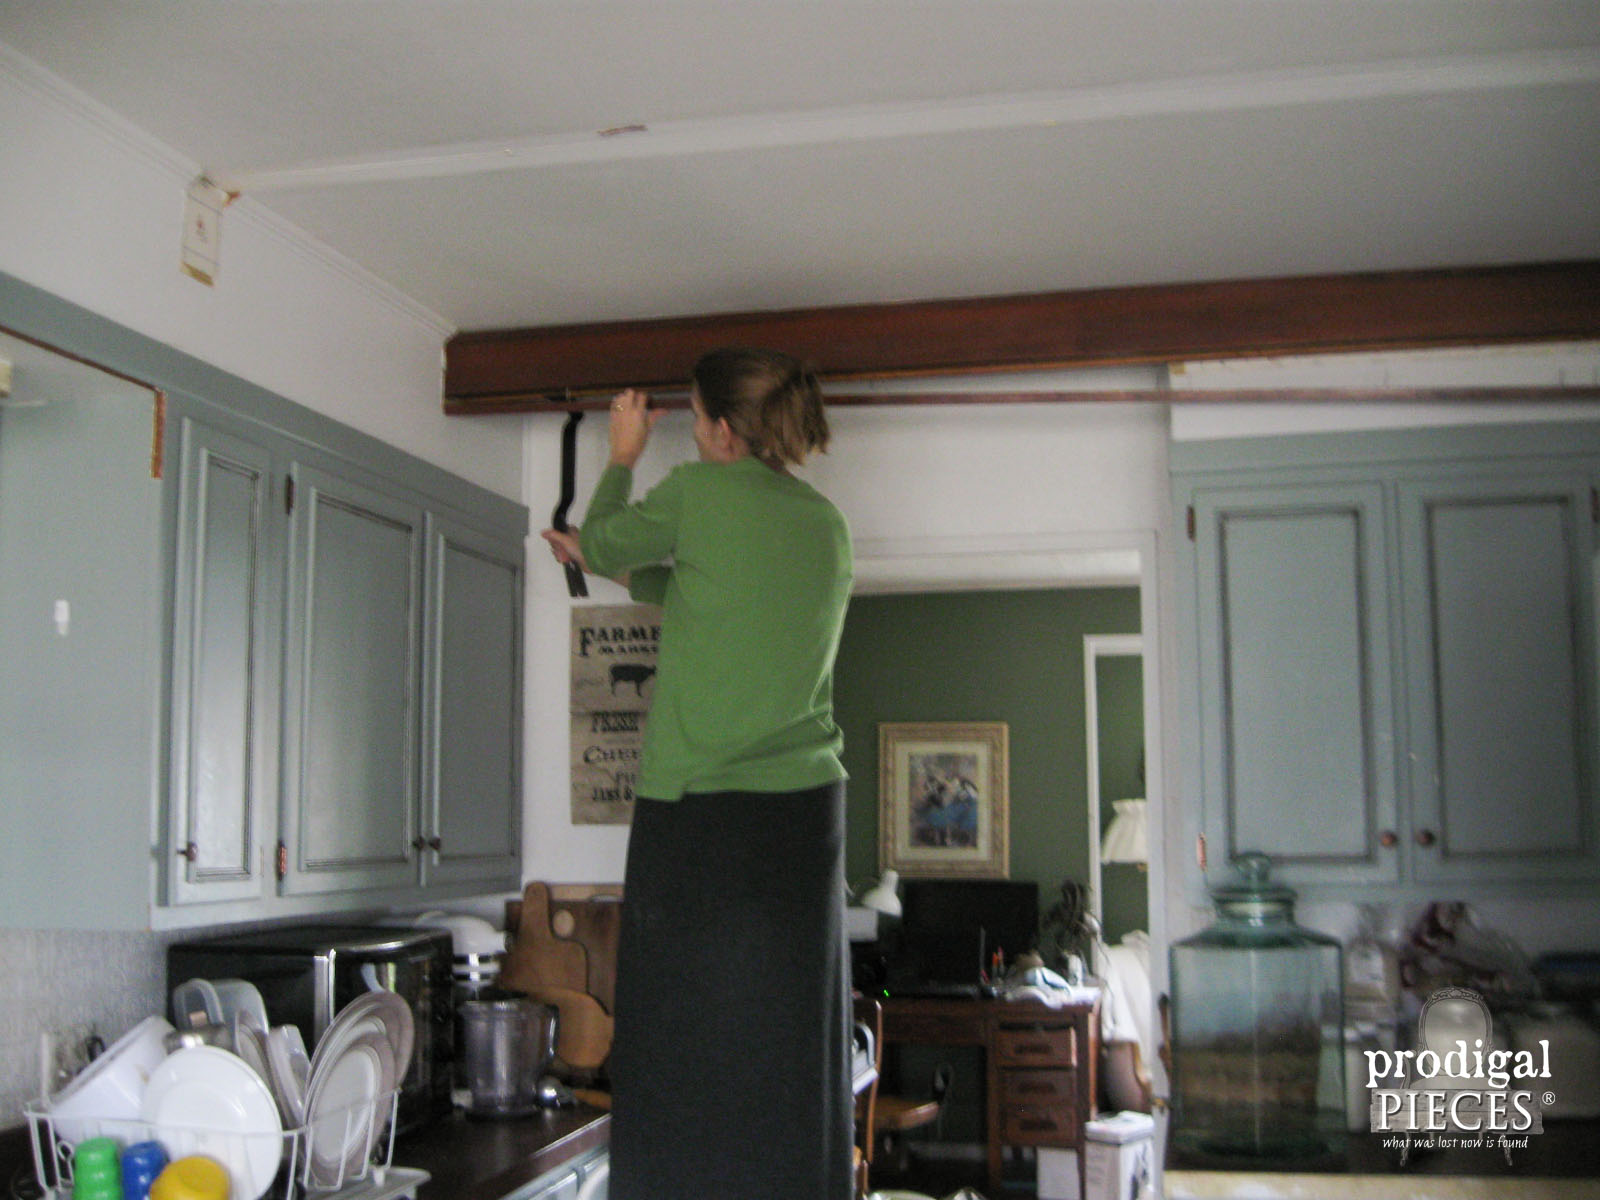 Removing Faux Barn Beams in Kitchen | Prodigal Pieces | www.prodigalpieces.com